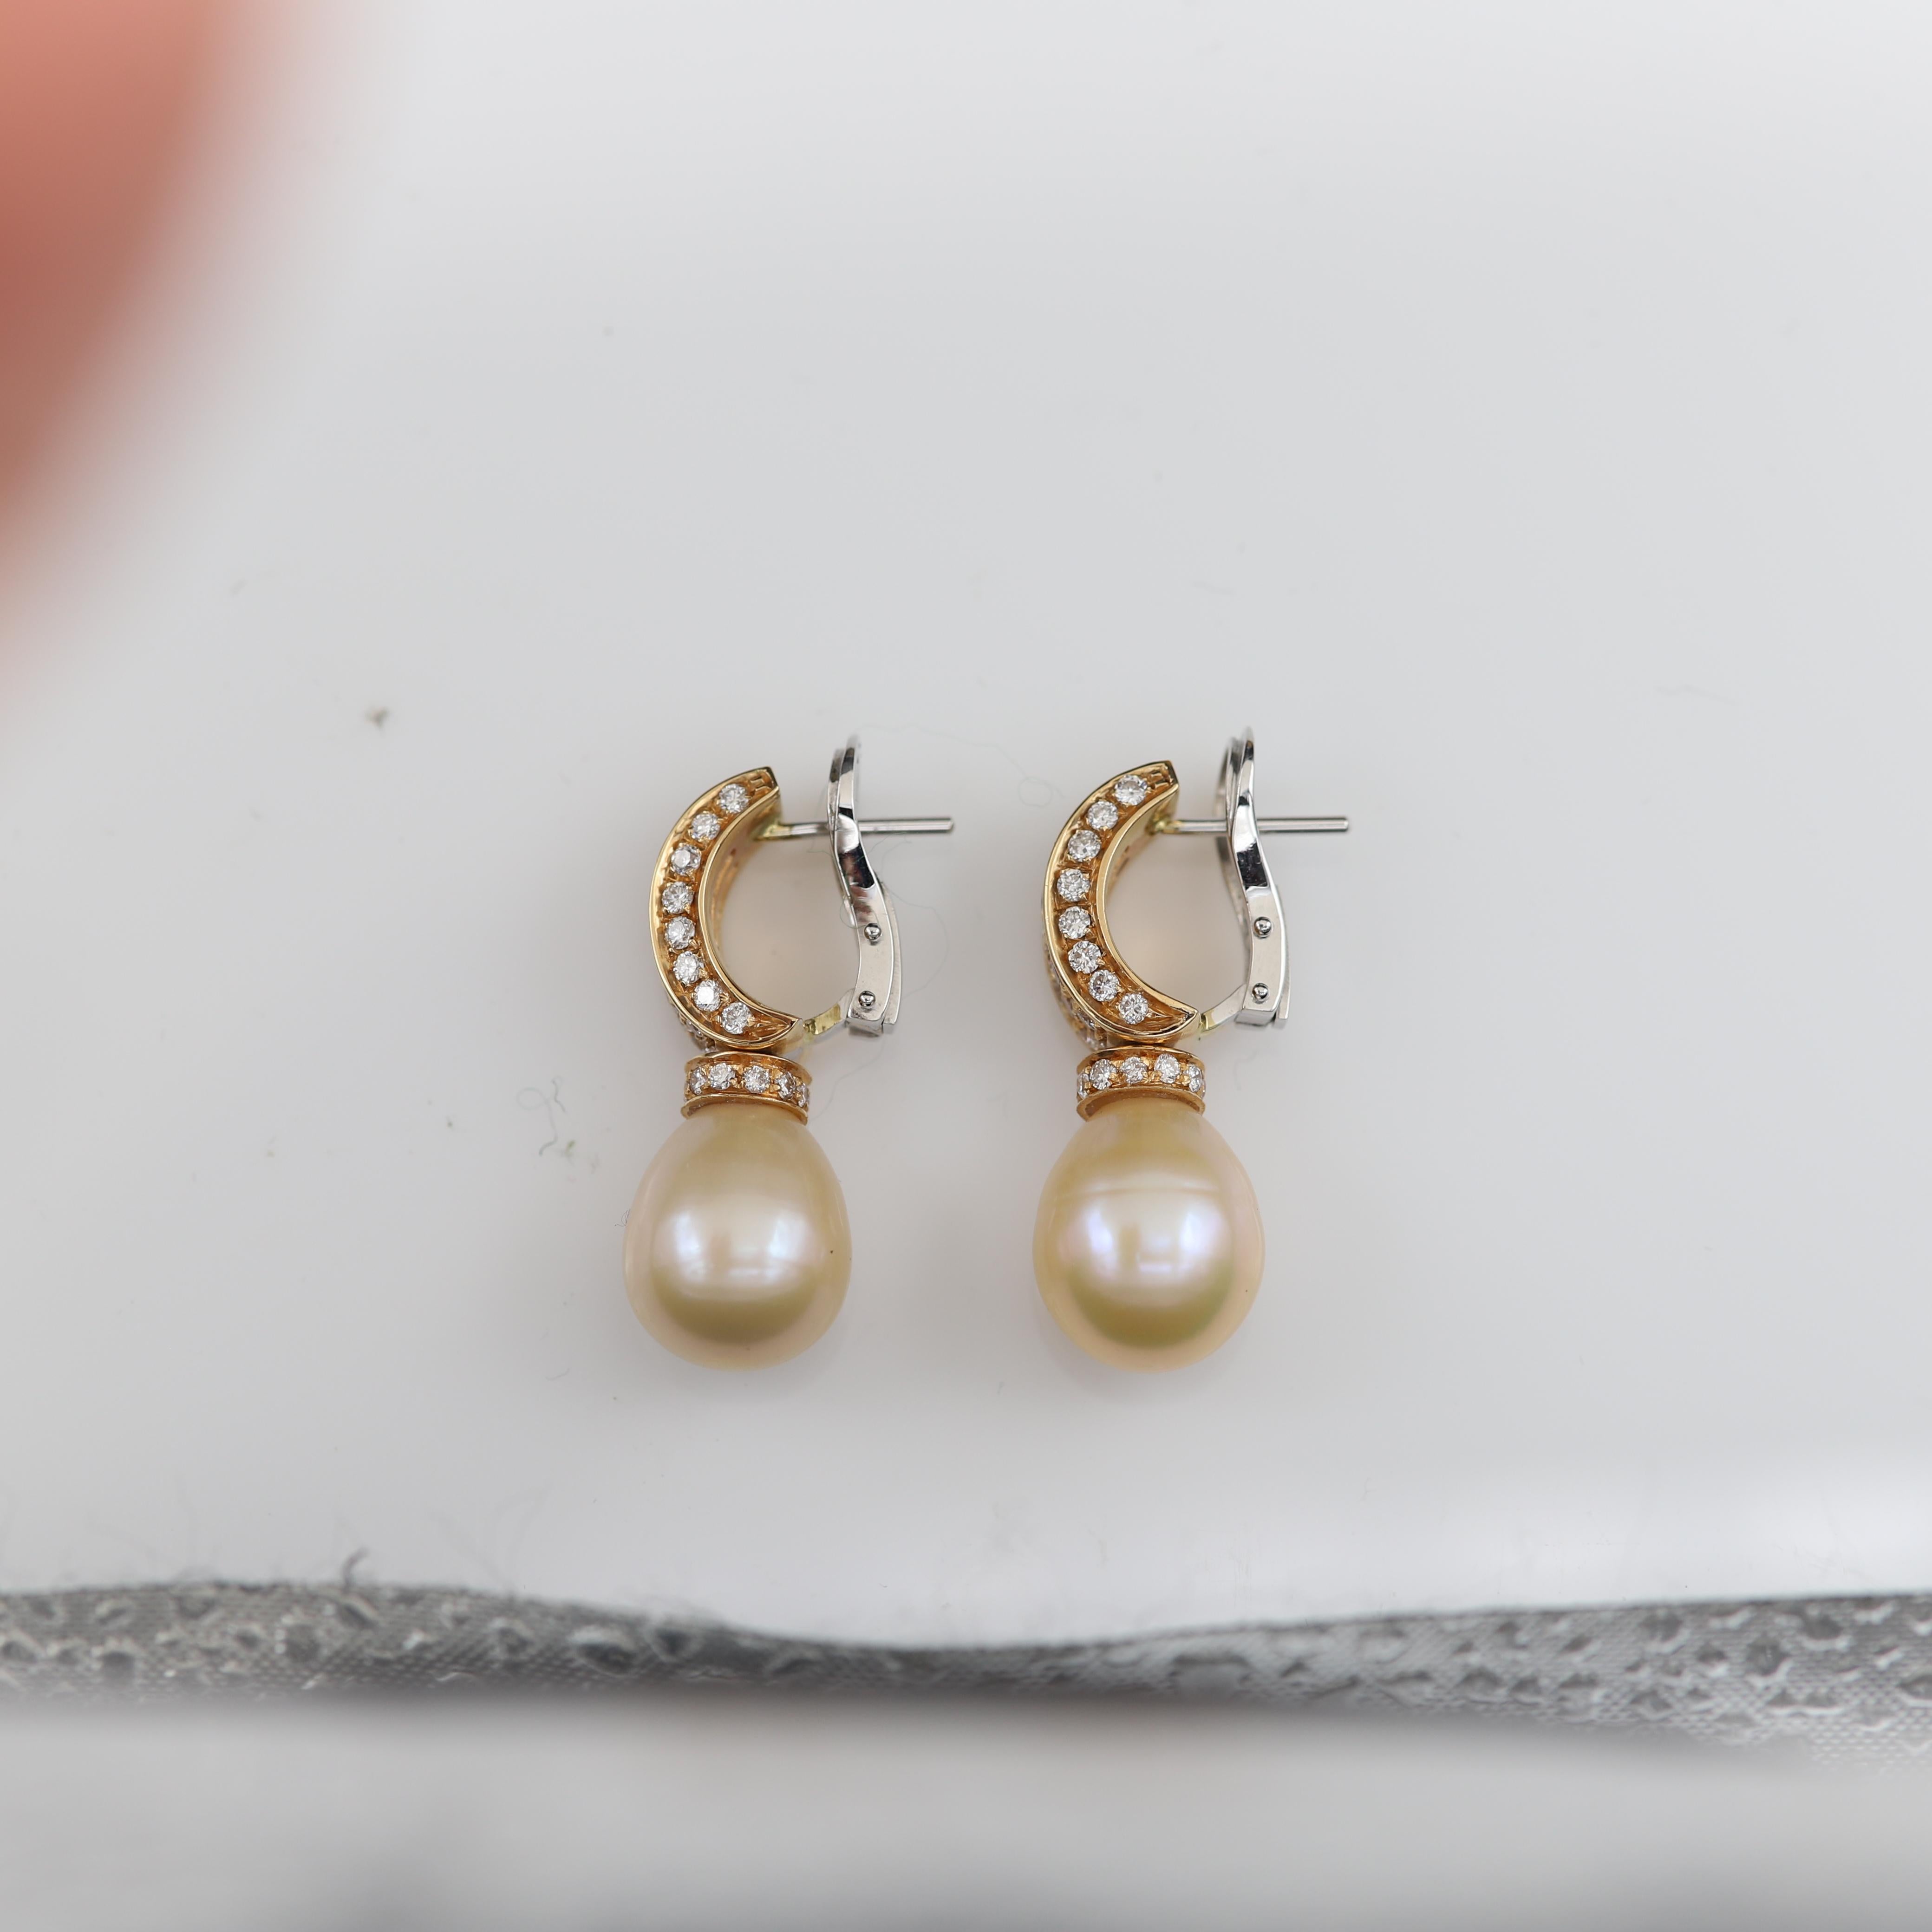 Mandrin Golden Pearls
18k Rose Gold & White Gold 17.40 grams
Diamonds 1.70 carat G-VS
Pearl size approx 12mm width
overall hight approx 30 mm
Back Lock - Omega Style 
(the Rose Gold tone color is a little bit towards the yellow tone)